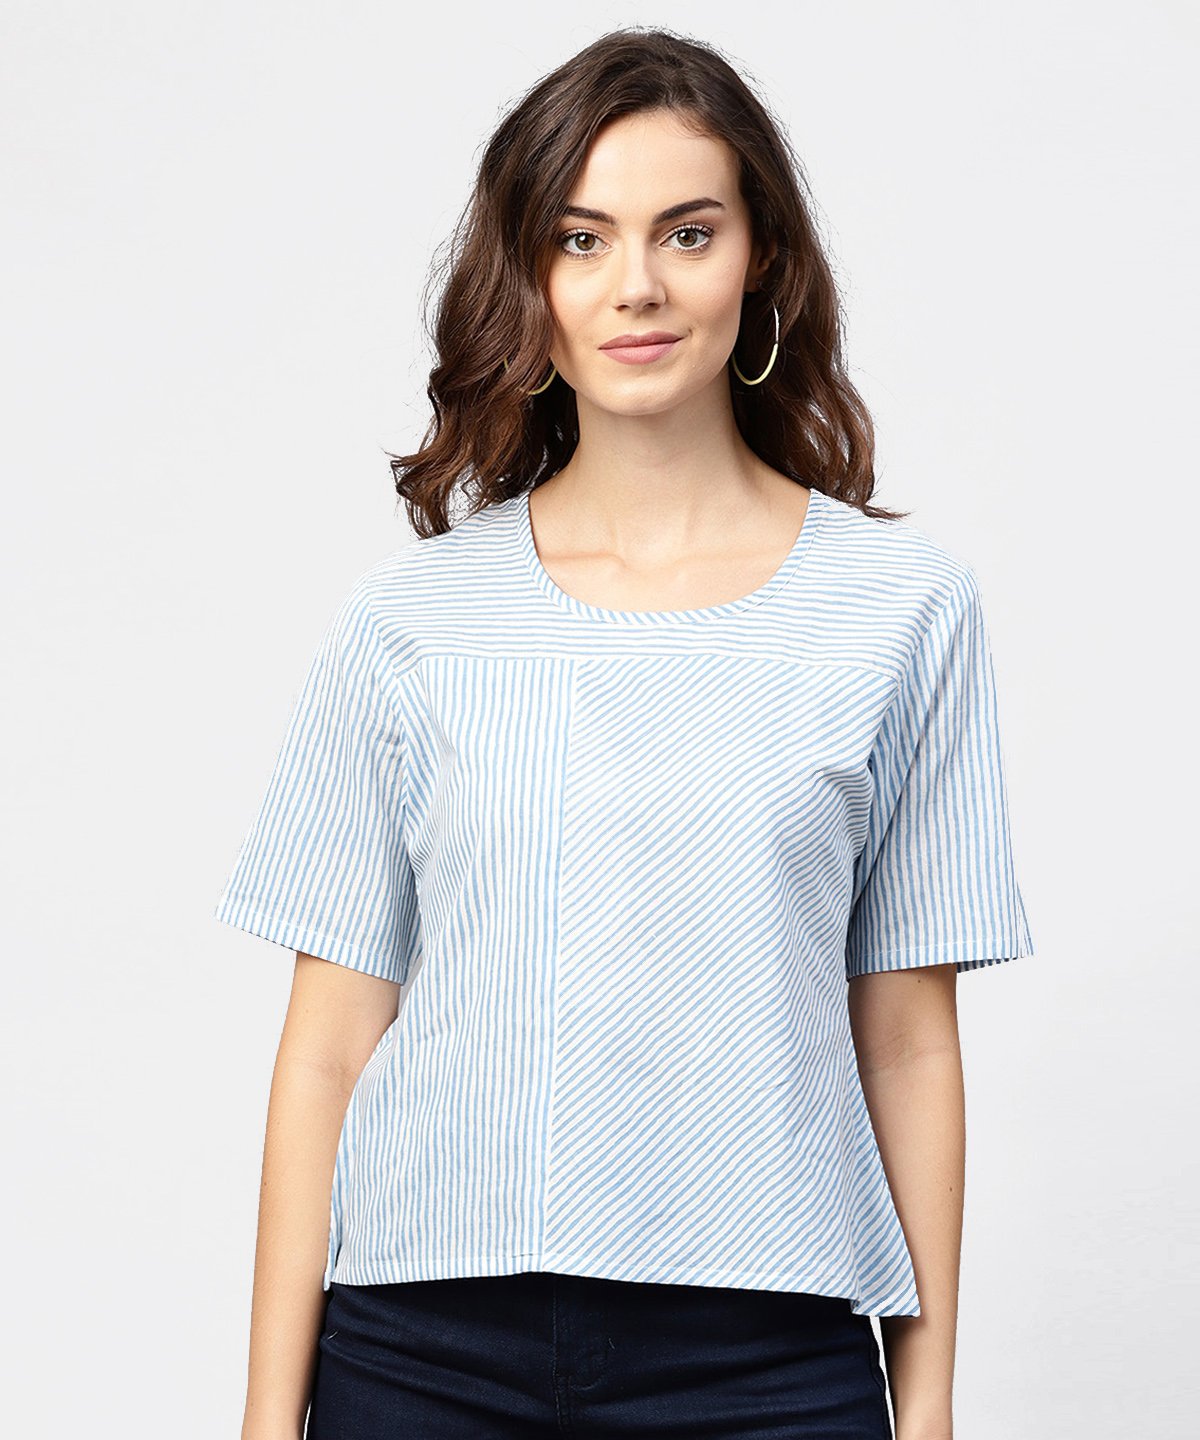 Women's Blue Striped Short Sleeve Top With Round Neck - Nayo Clothing